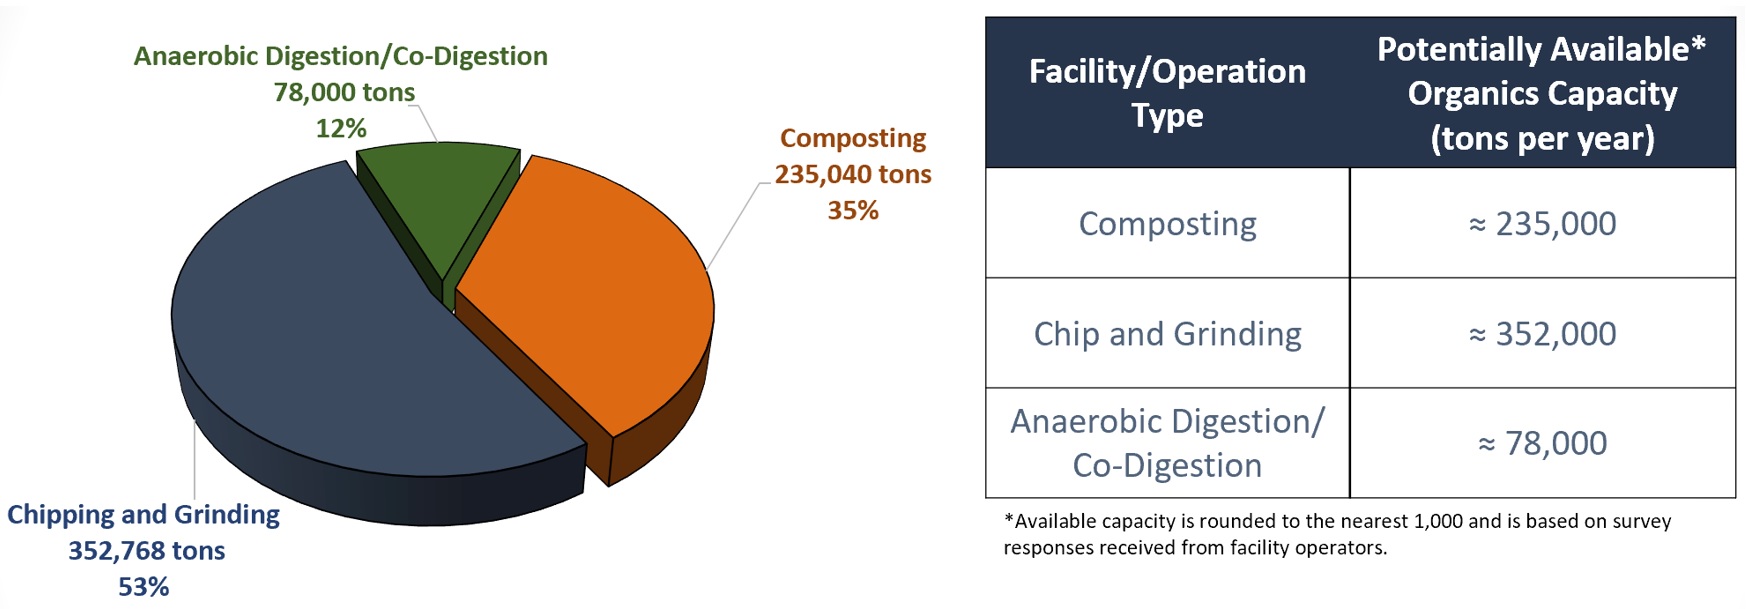 organic waste Is disposed by residents & business in LA County